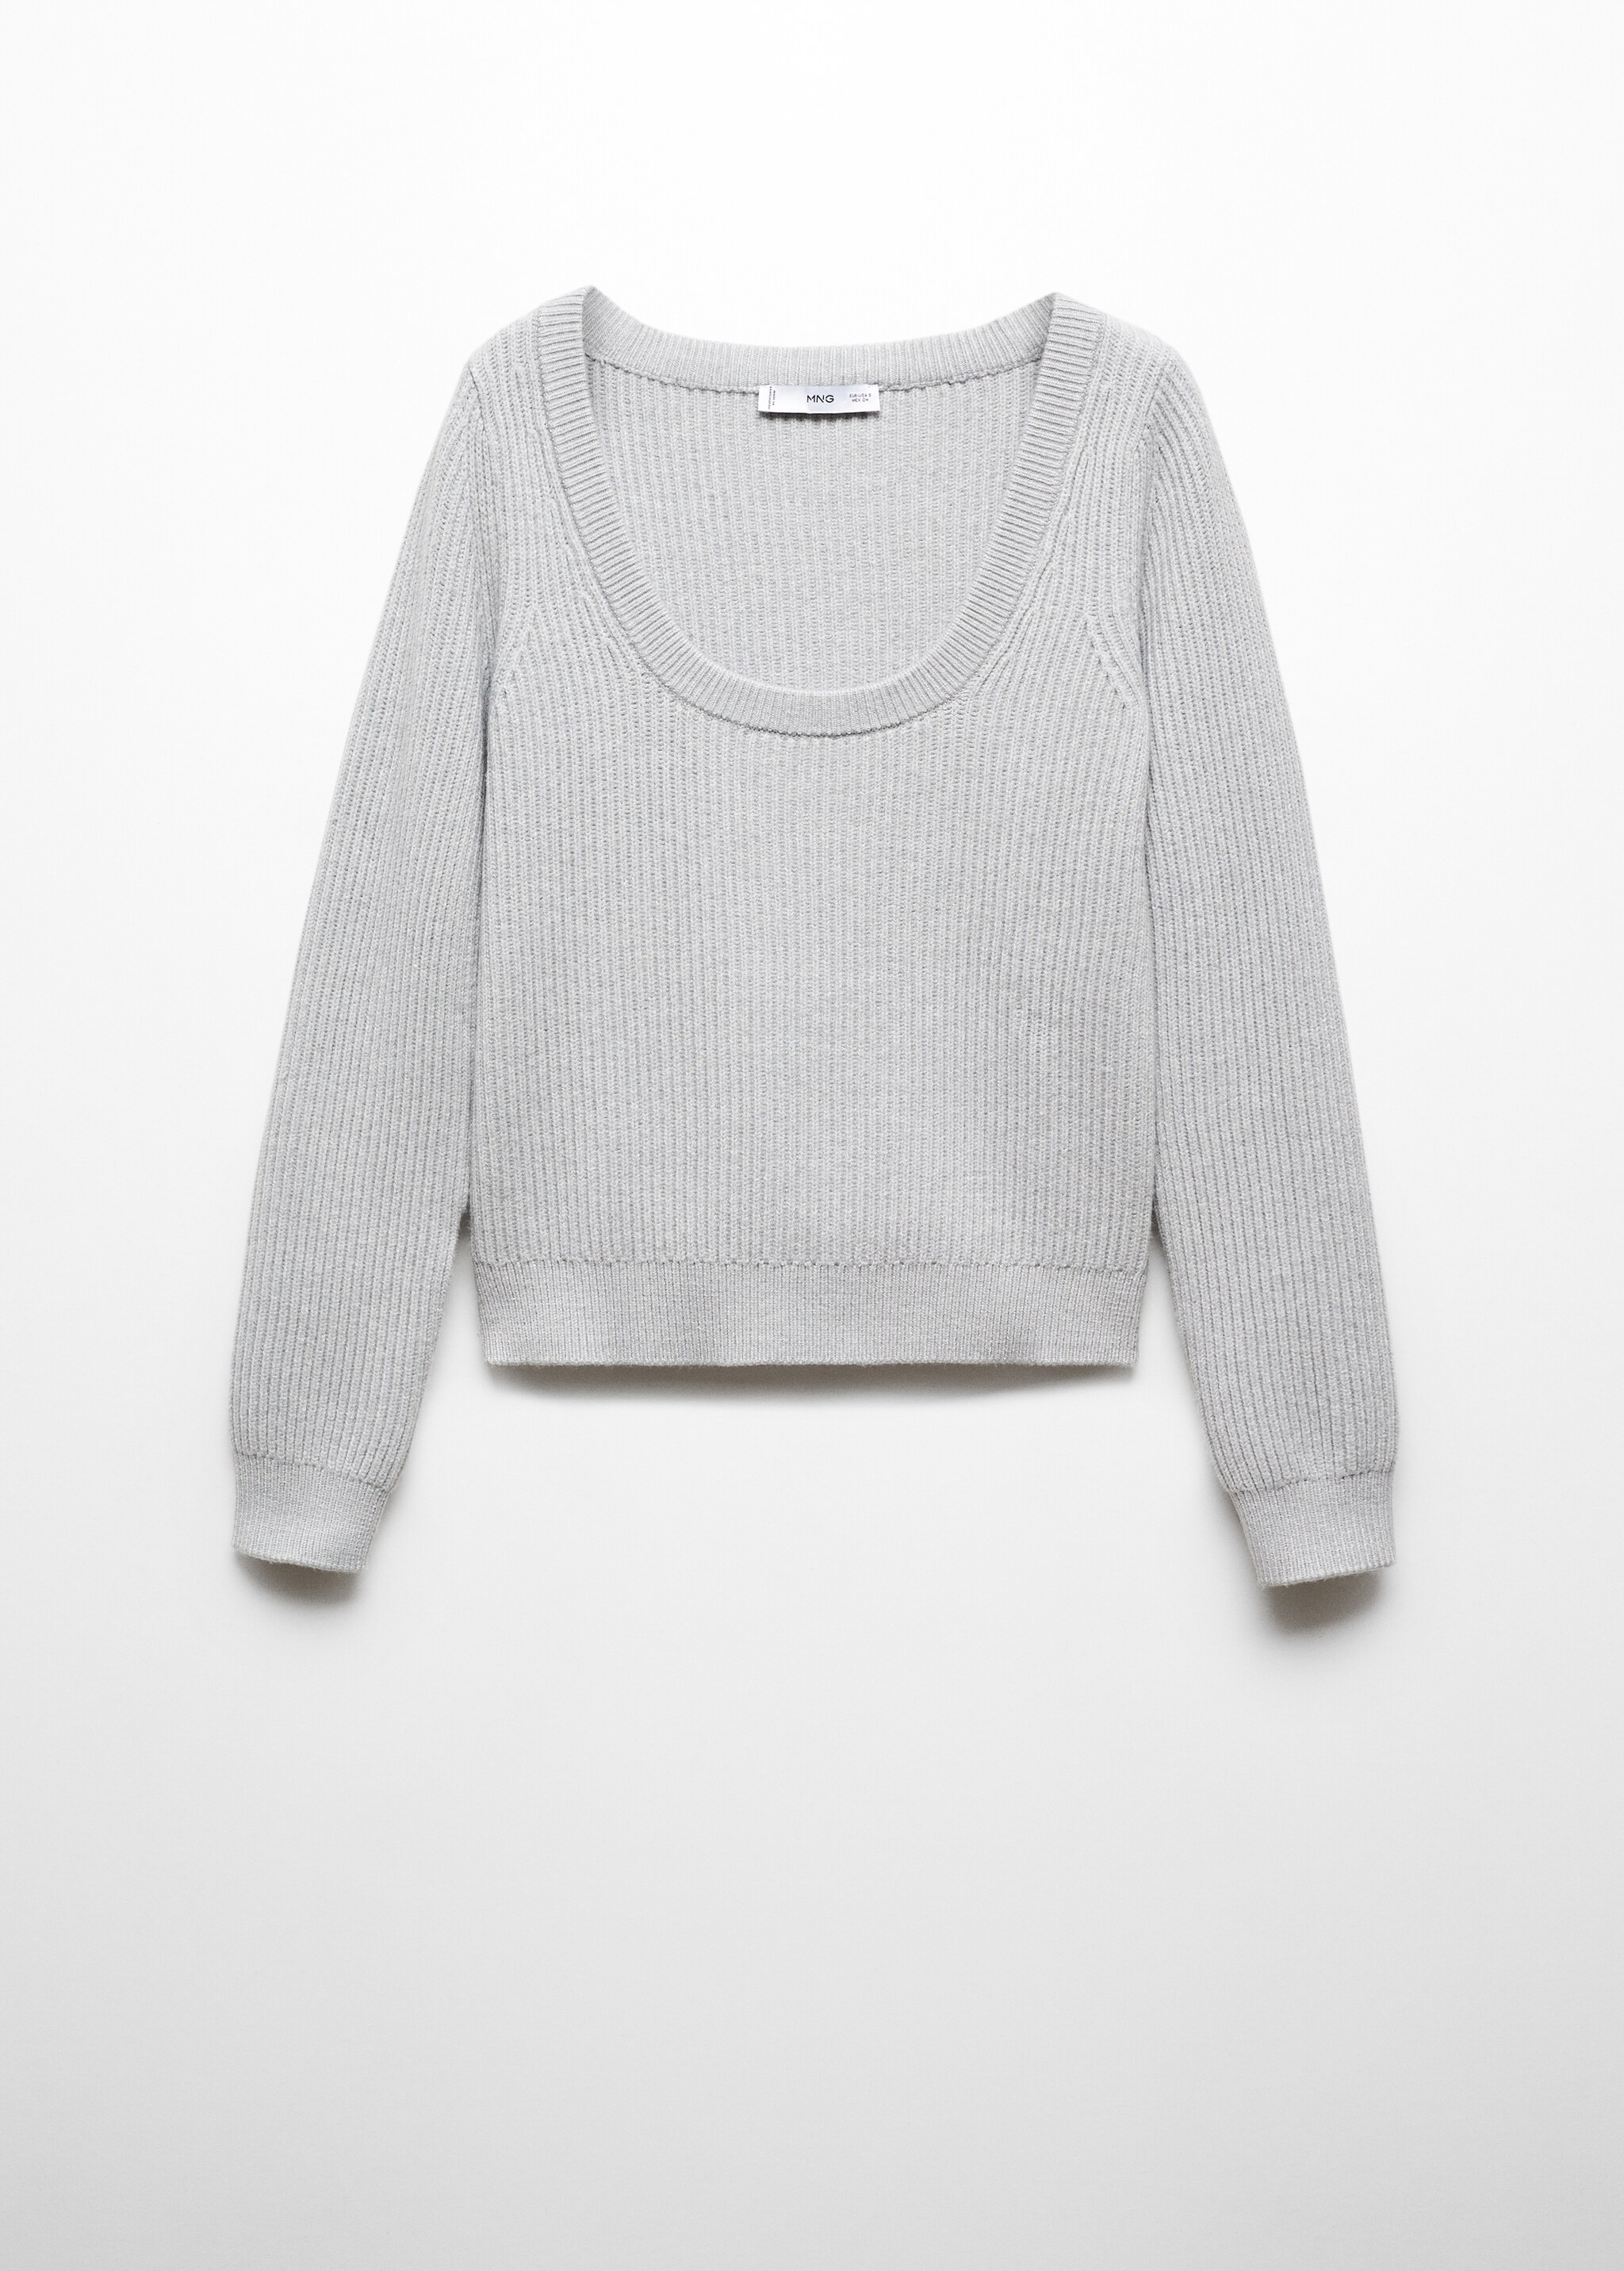 Low-cut neck sweater - Article without model